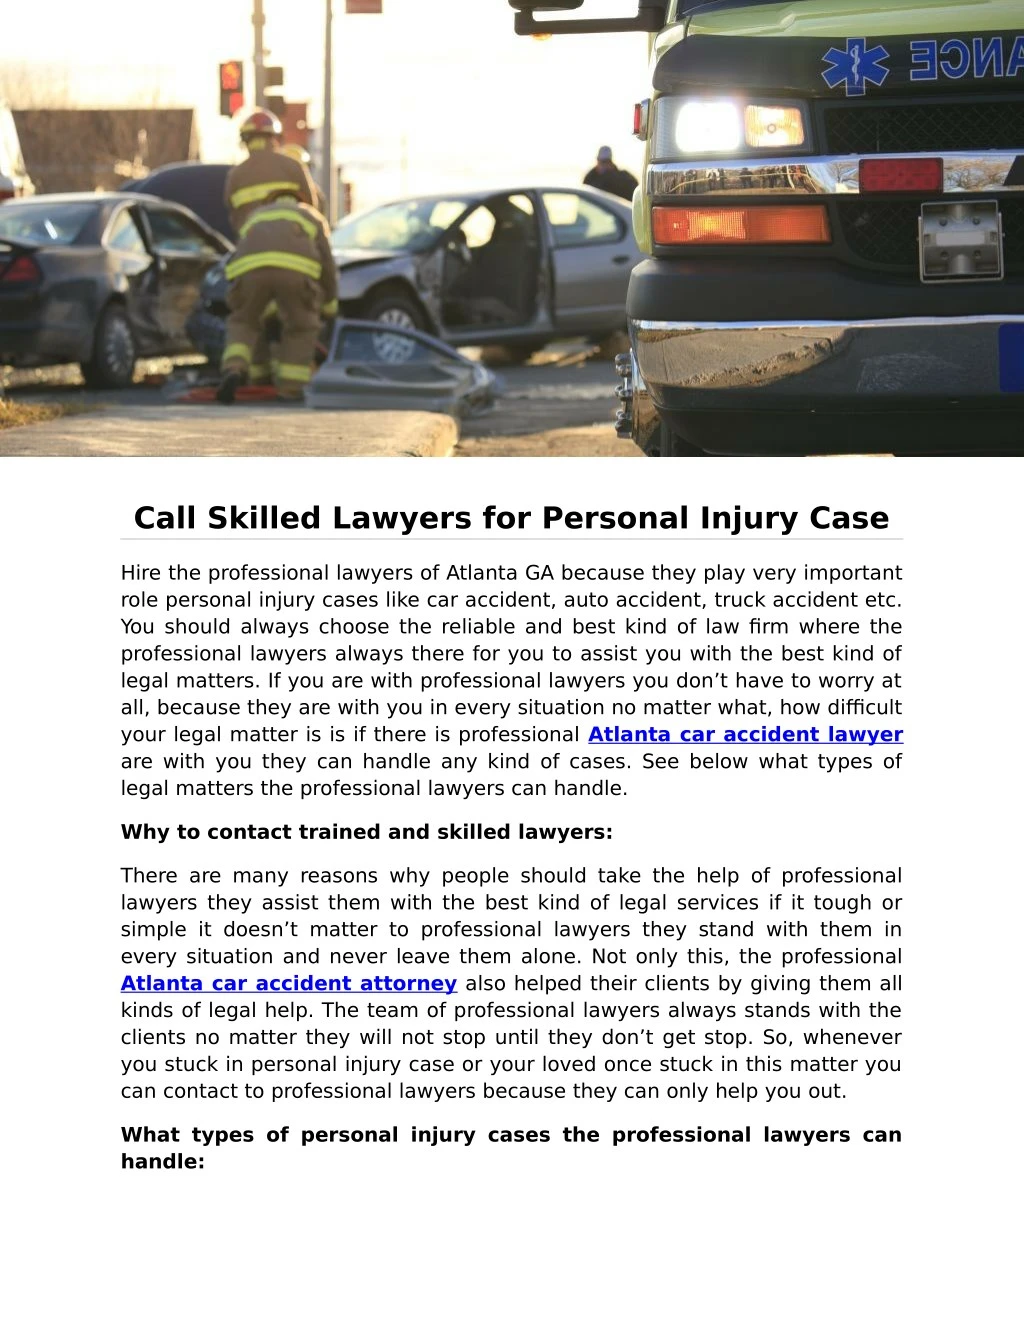 call skilled lawyers for personal injury case